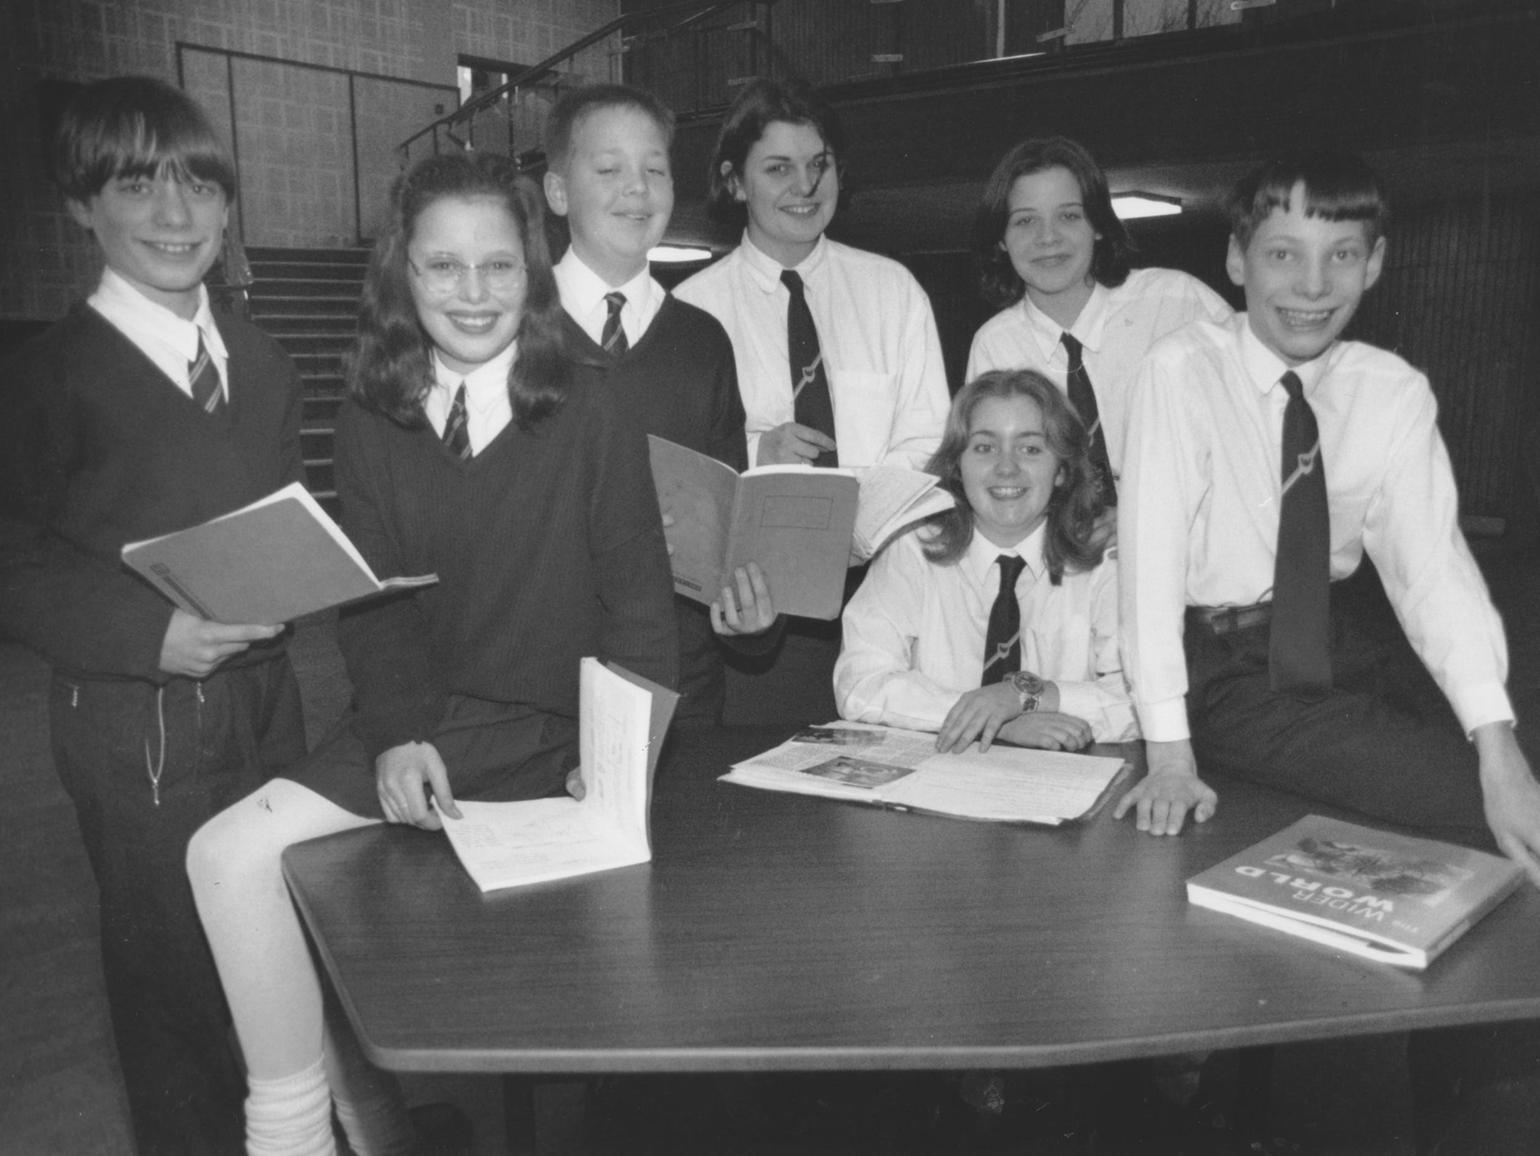 The editorial team at Graham School in March 1997. From left, Ashley Edwards, Jenny Robshaw, Jamie Davies, Kelly Andrews, Emma Fitt, seated, Lois Hurst, and Gregory Clark.